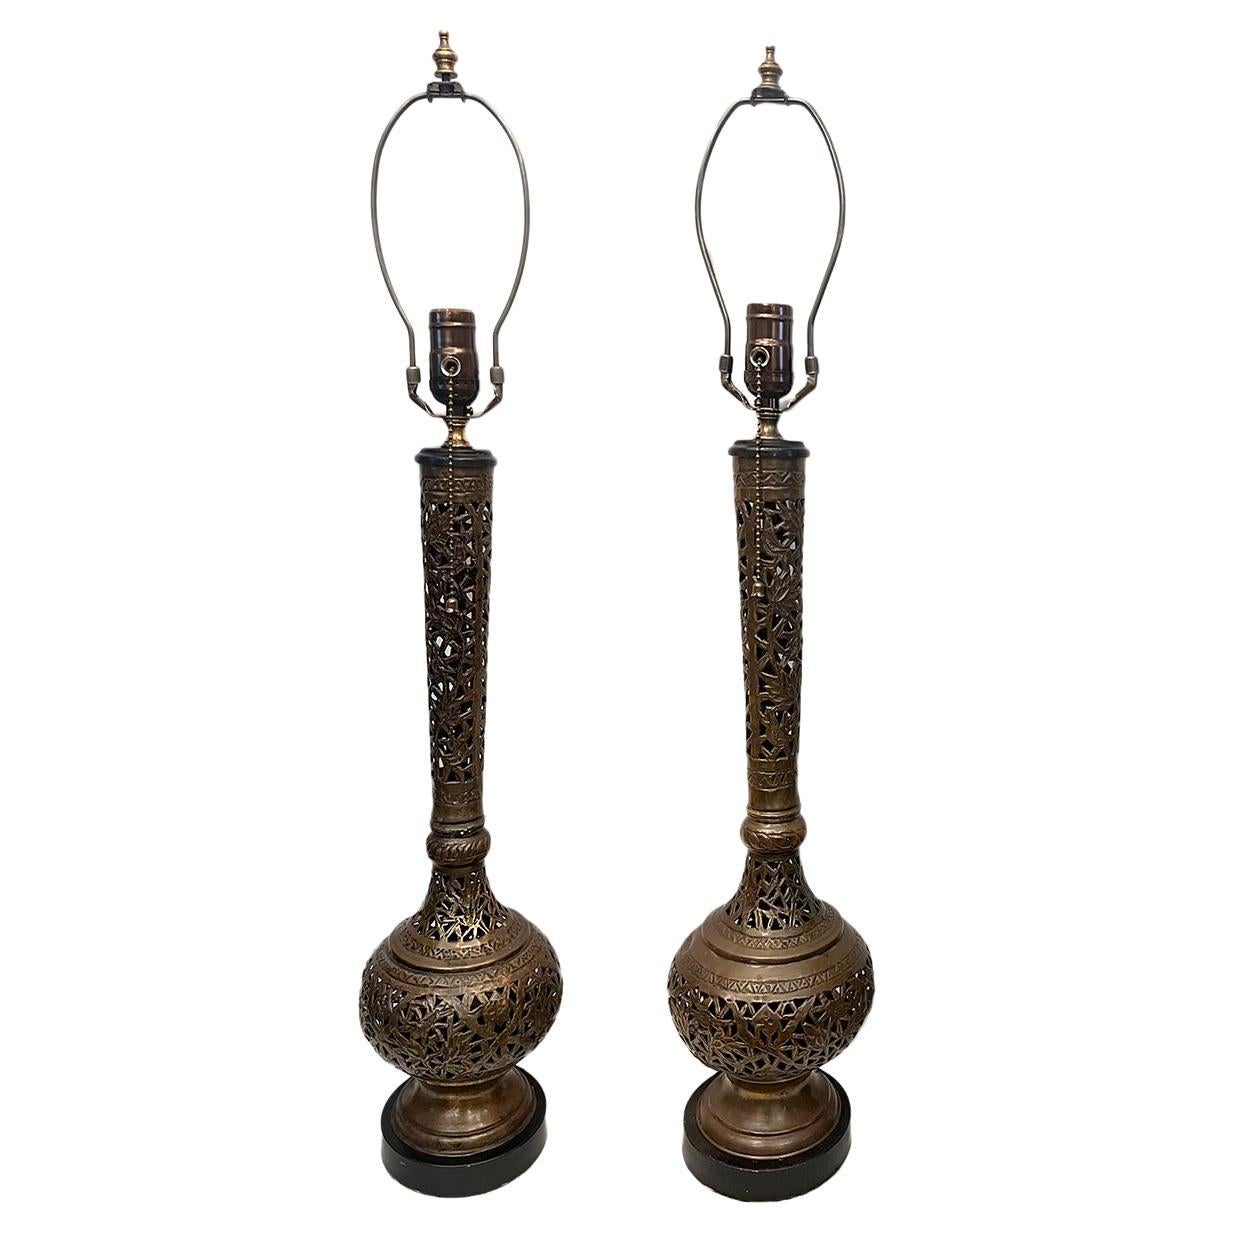 Pair of Pierced Moroccan Lamps